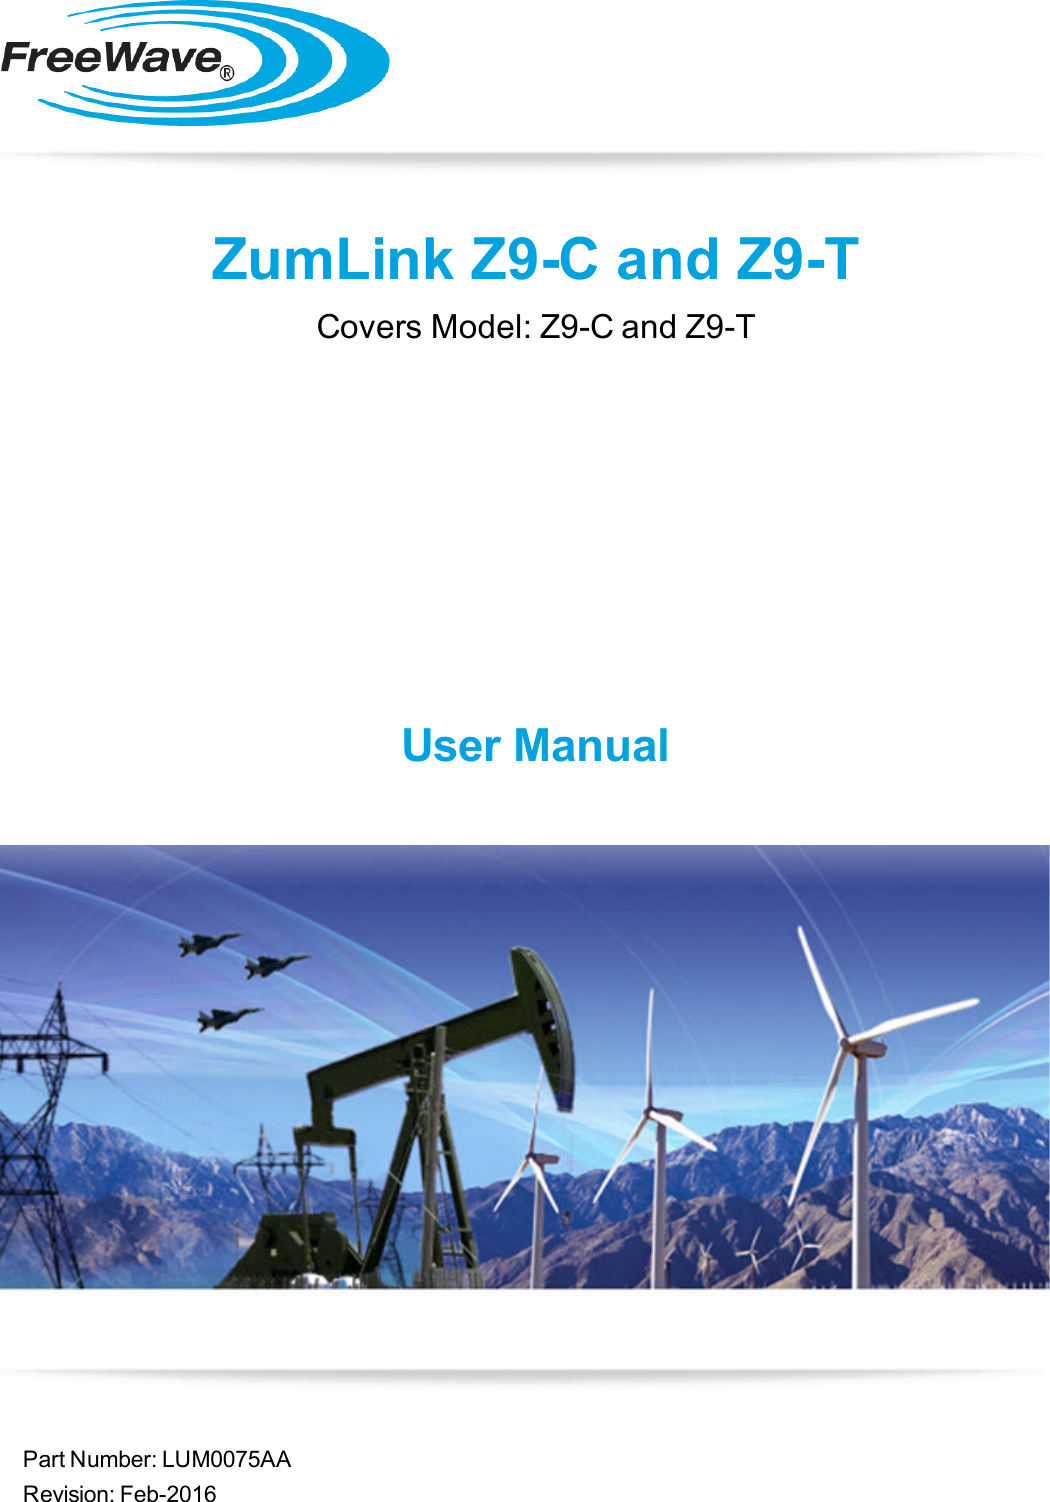 Part Number: LUM0075AARevision: Feb-2016ZumLink Z9-C and Z9-TCovers Model: Z9-C and Z9-TUser Manual